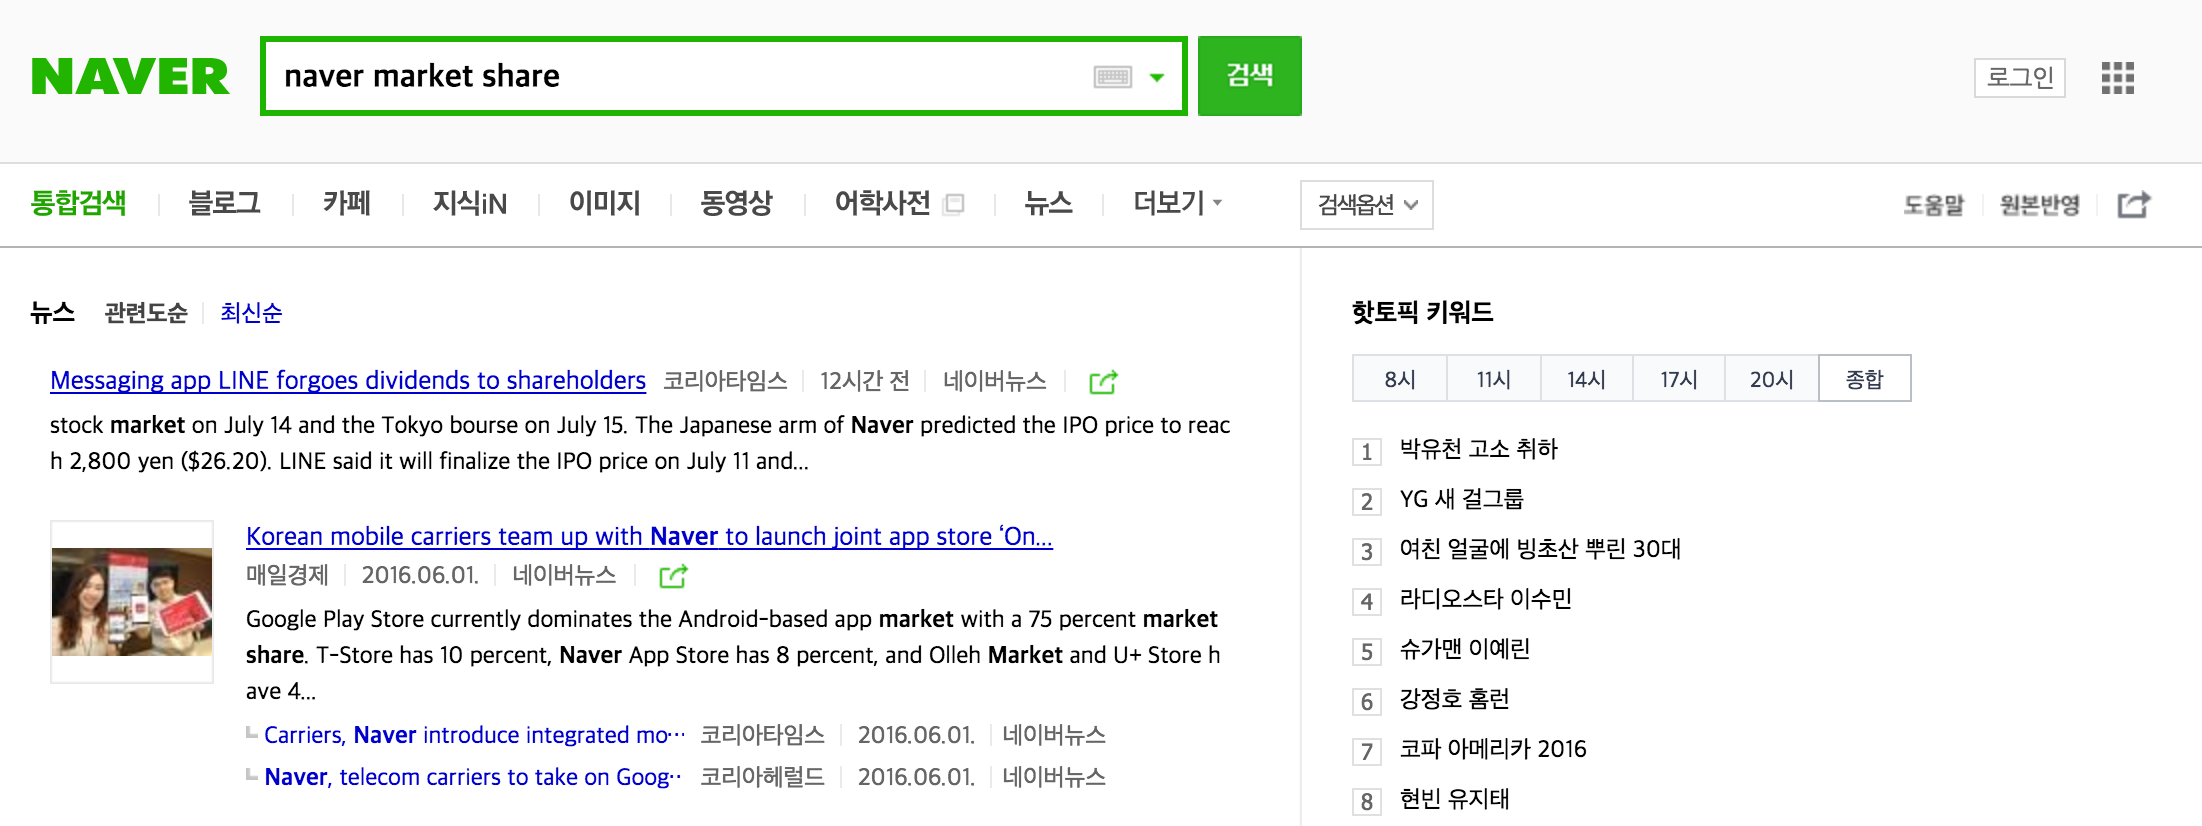 learn about naver which is a world search engine - brightedge